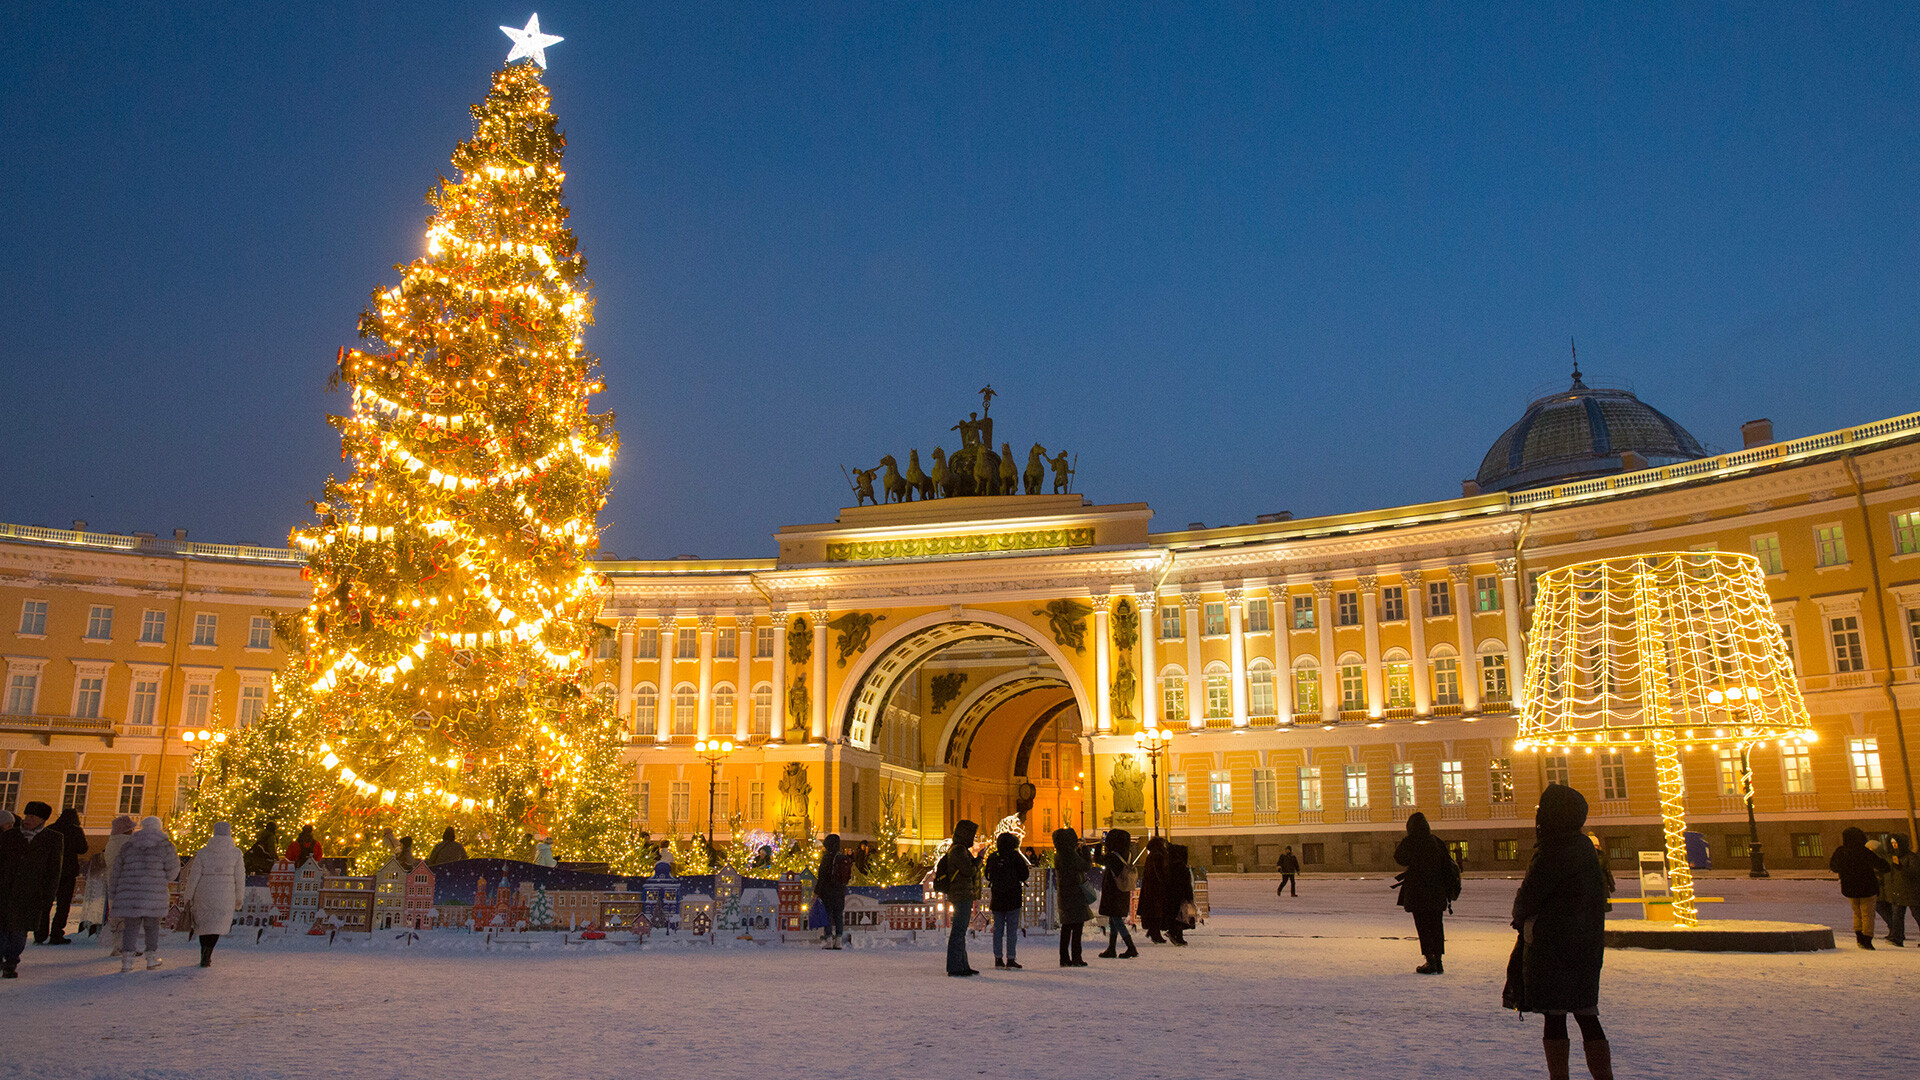 Light decorations at the Palace Square in St. Petersburg, Dec. 20, 2021.